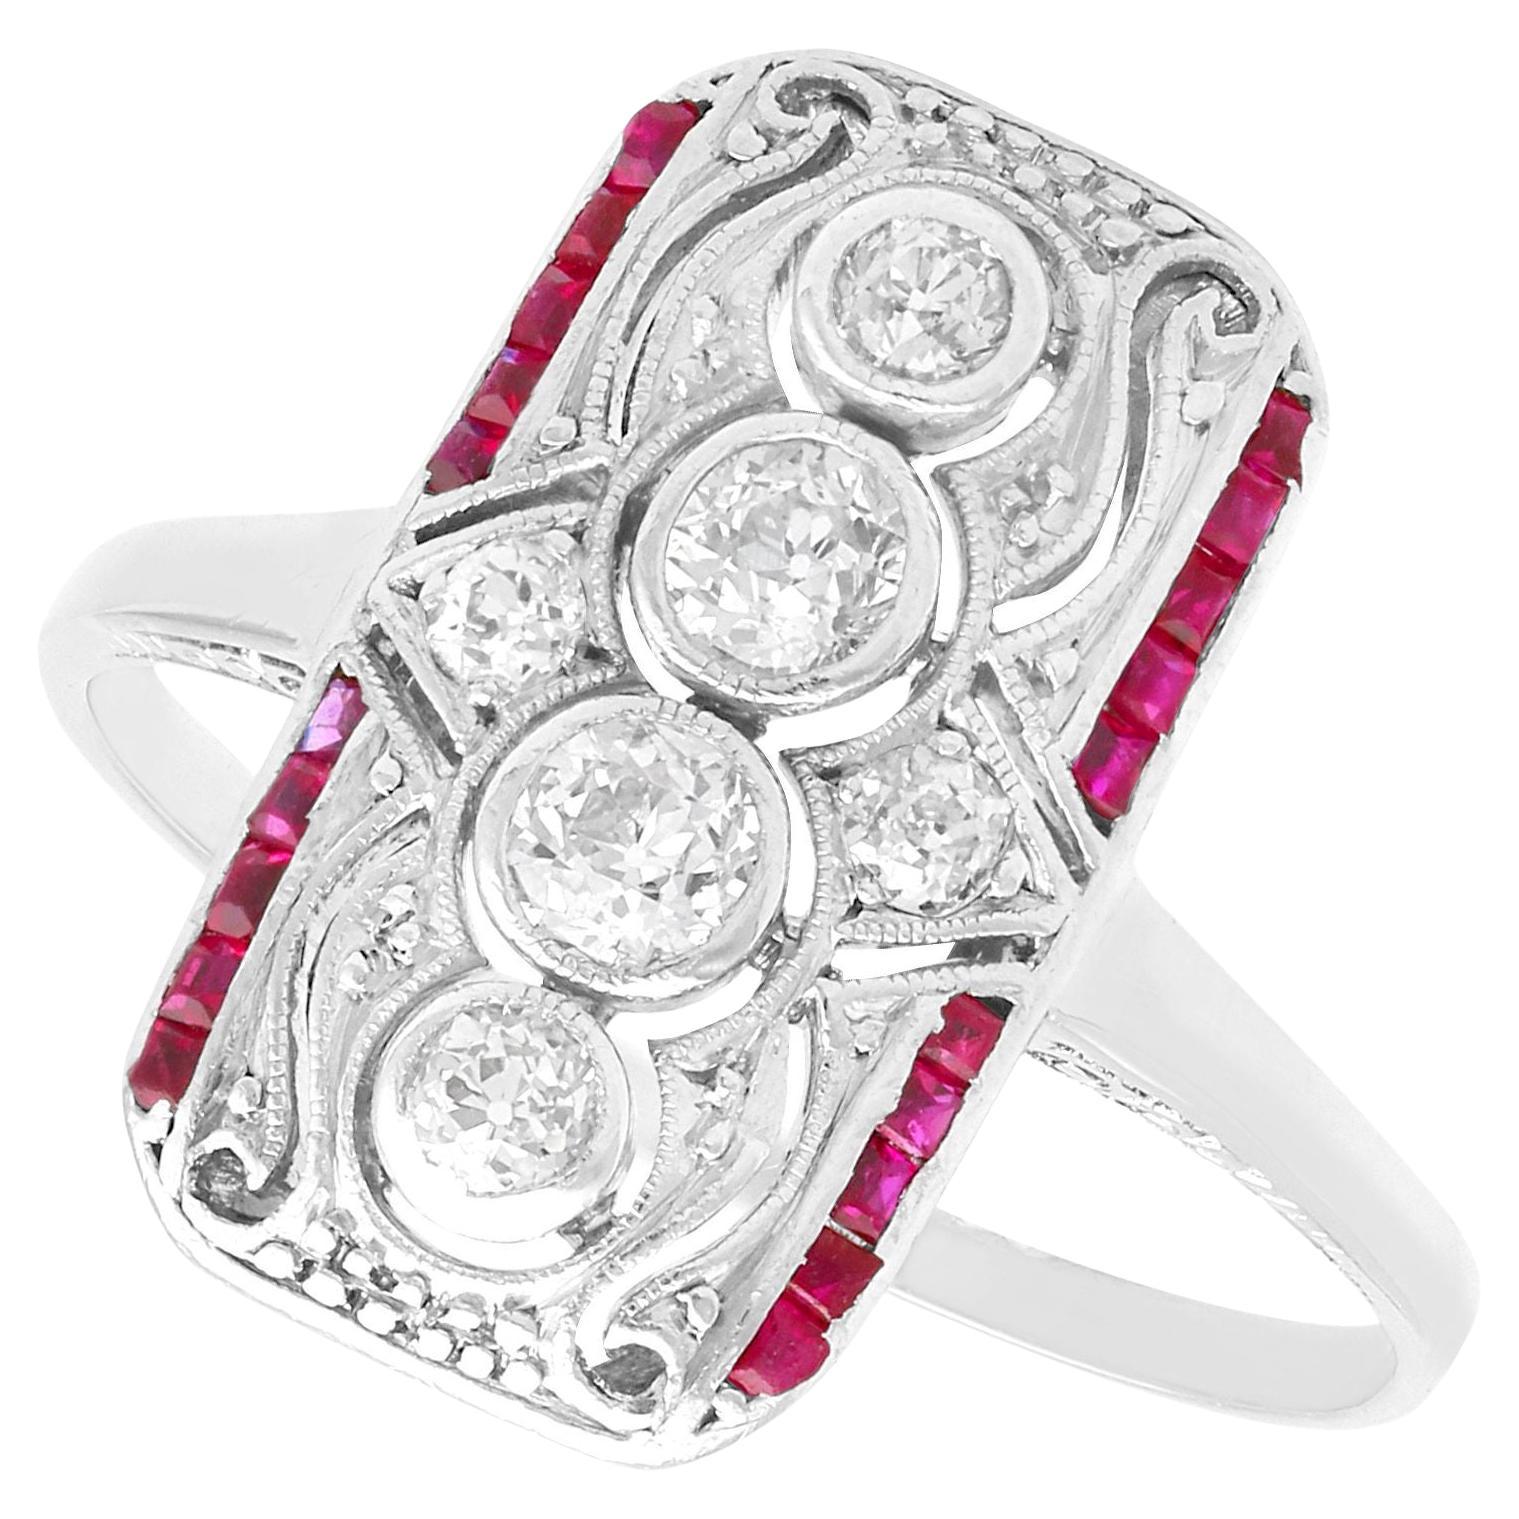 Antique 0.50 Ct Diamond and 0.20 Ct Ruby 18 Ct White Gold Dress Ring